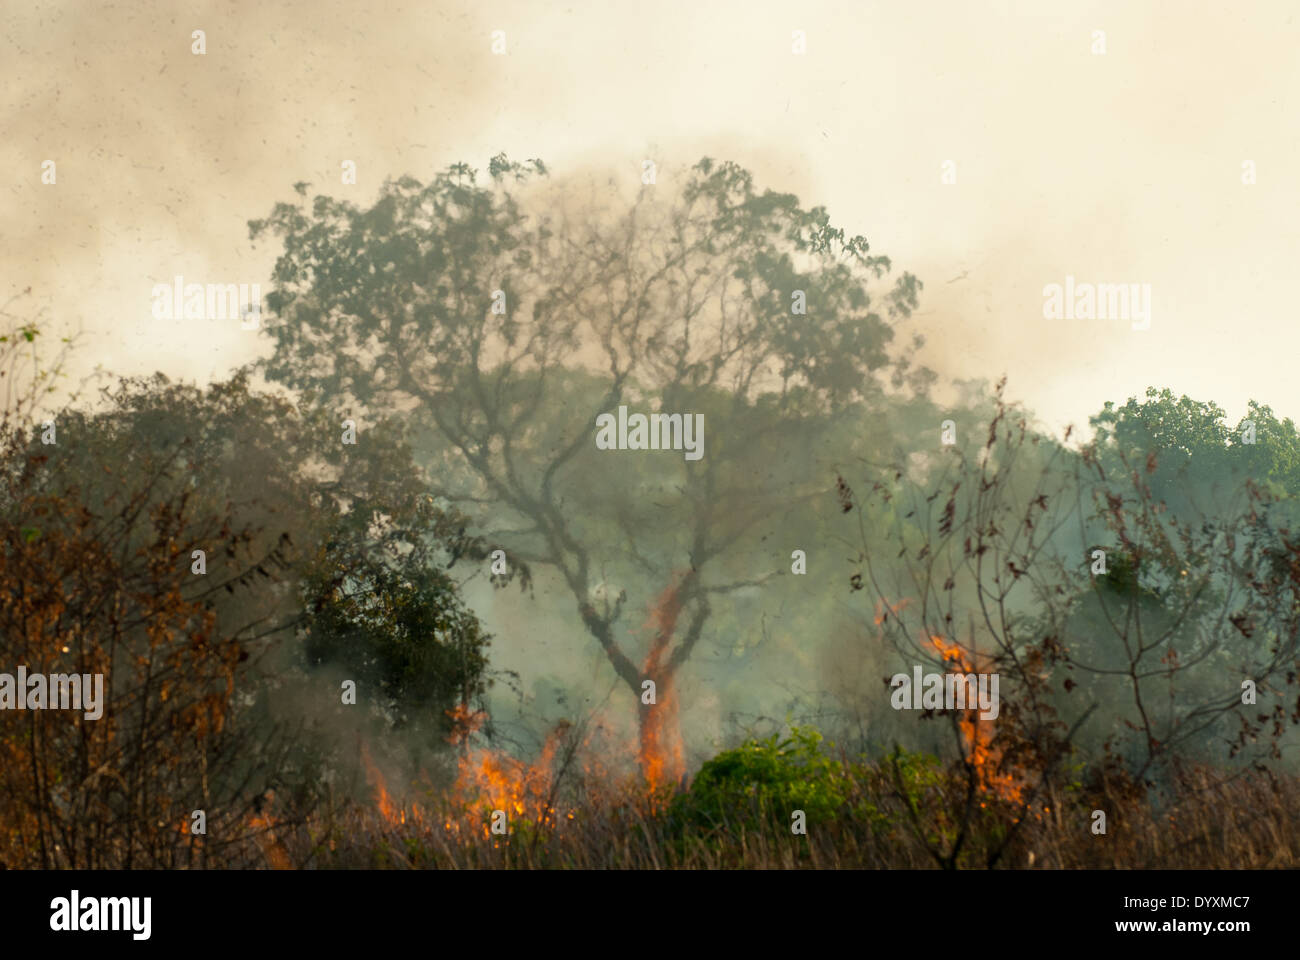 Xingu, Mato Grosso, Brazil. Fire burning through woodlands in the cerrados forest; a majestic tree with flames all around. Heat haze. Stock Photo